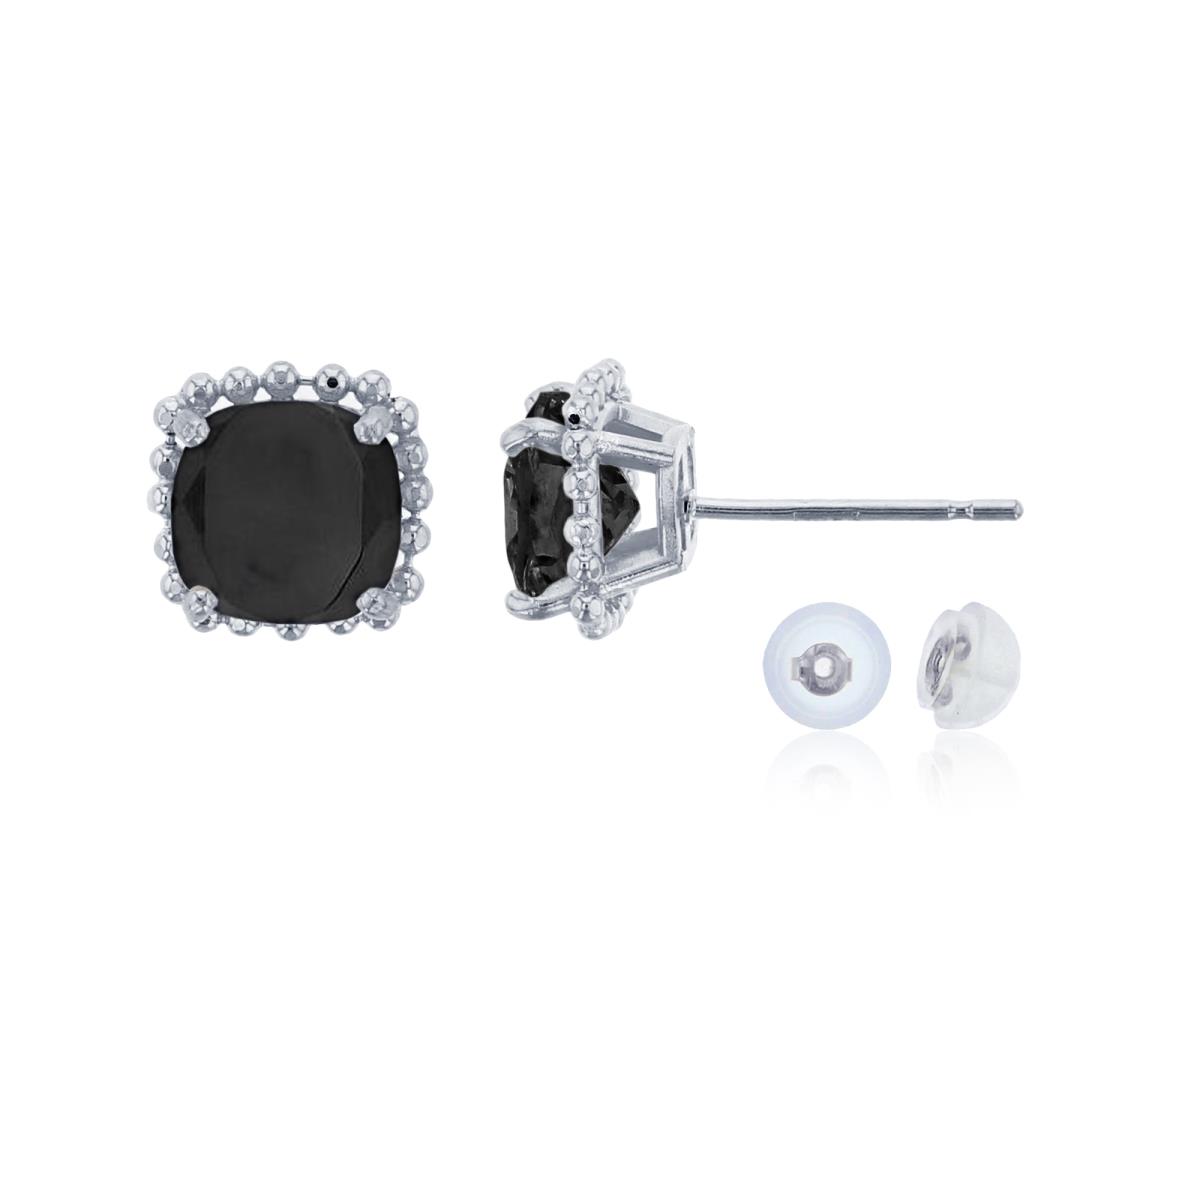 14K White Gold 6x6mm Cushion Cut Onyx Bead Frame Stud Earring with Silicone Back